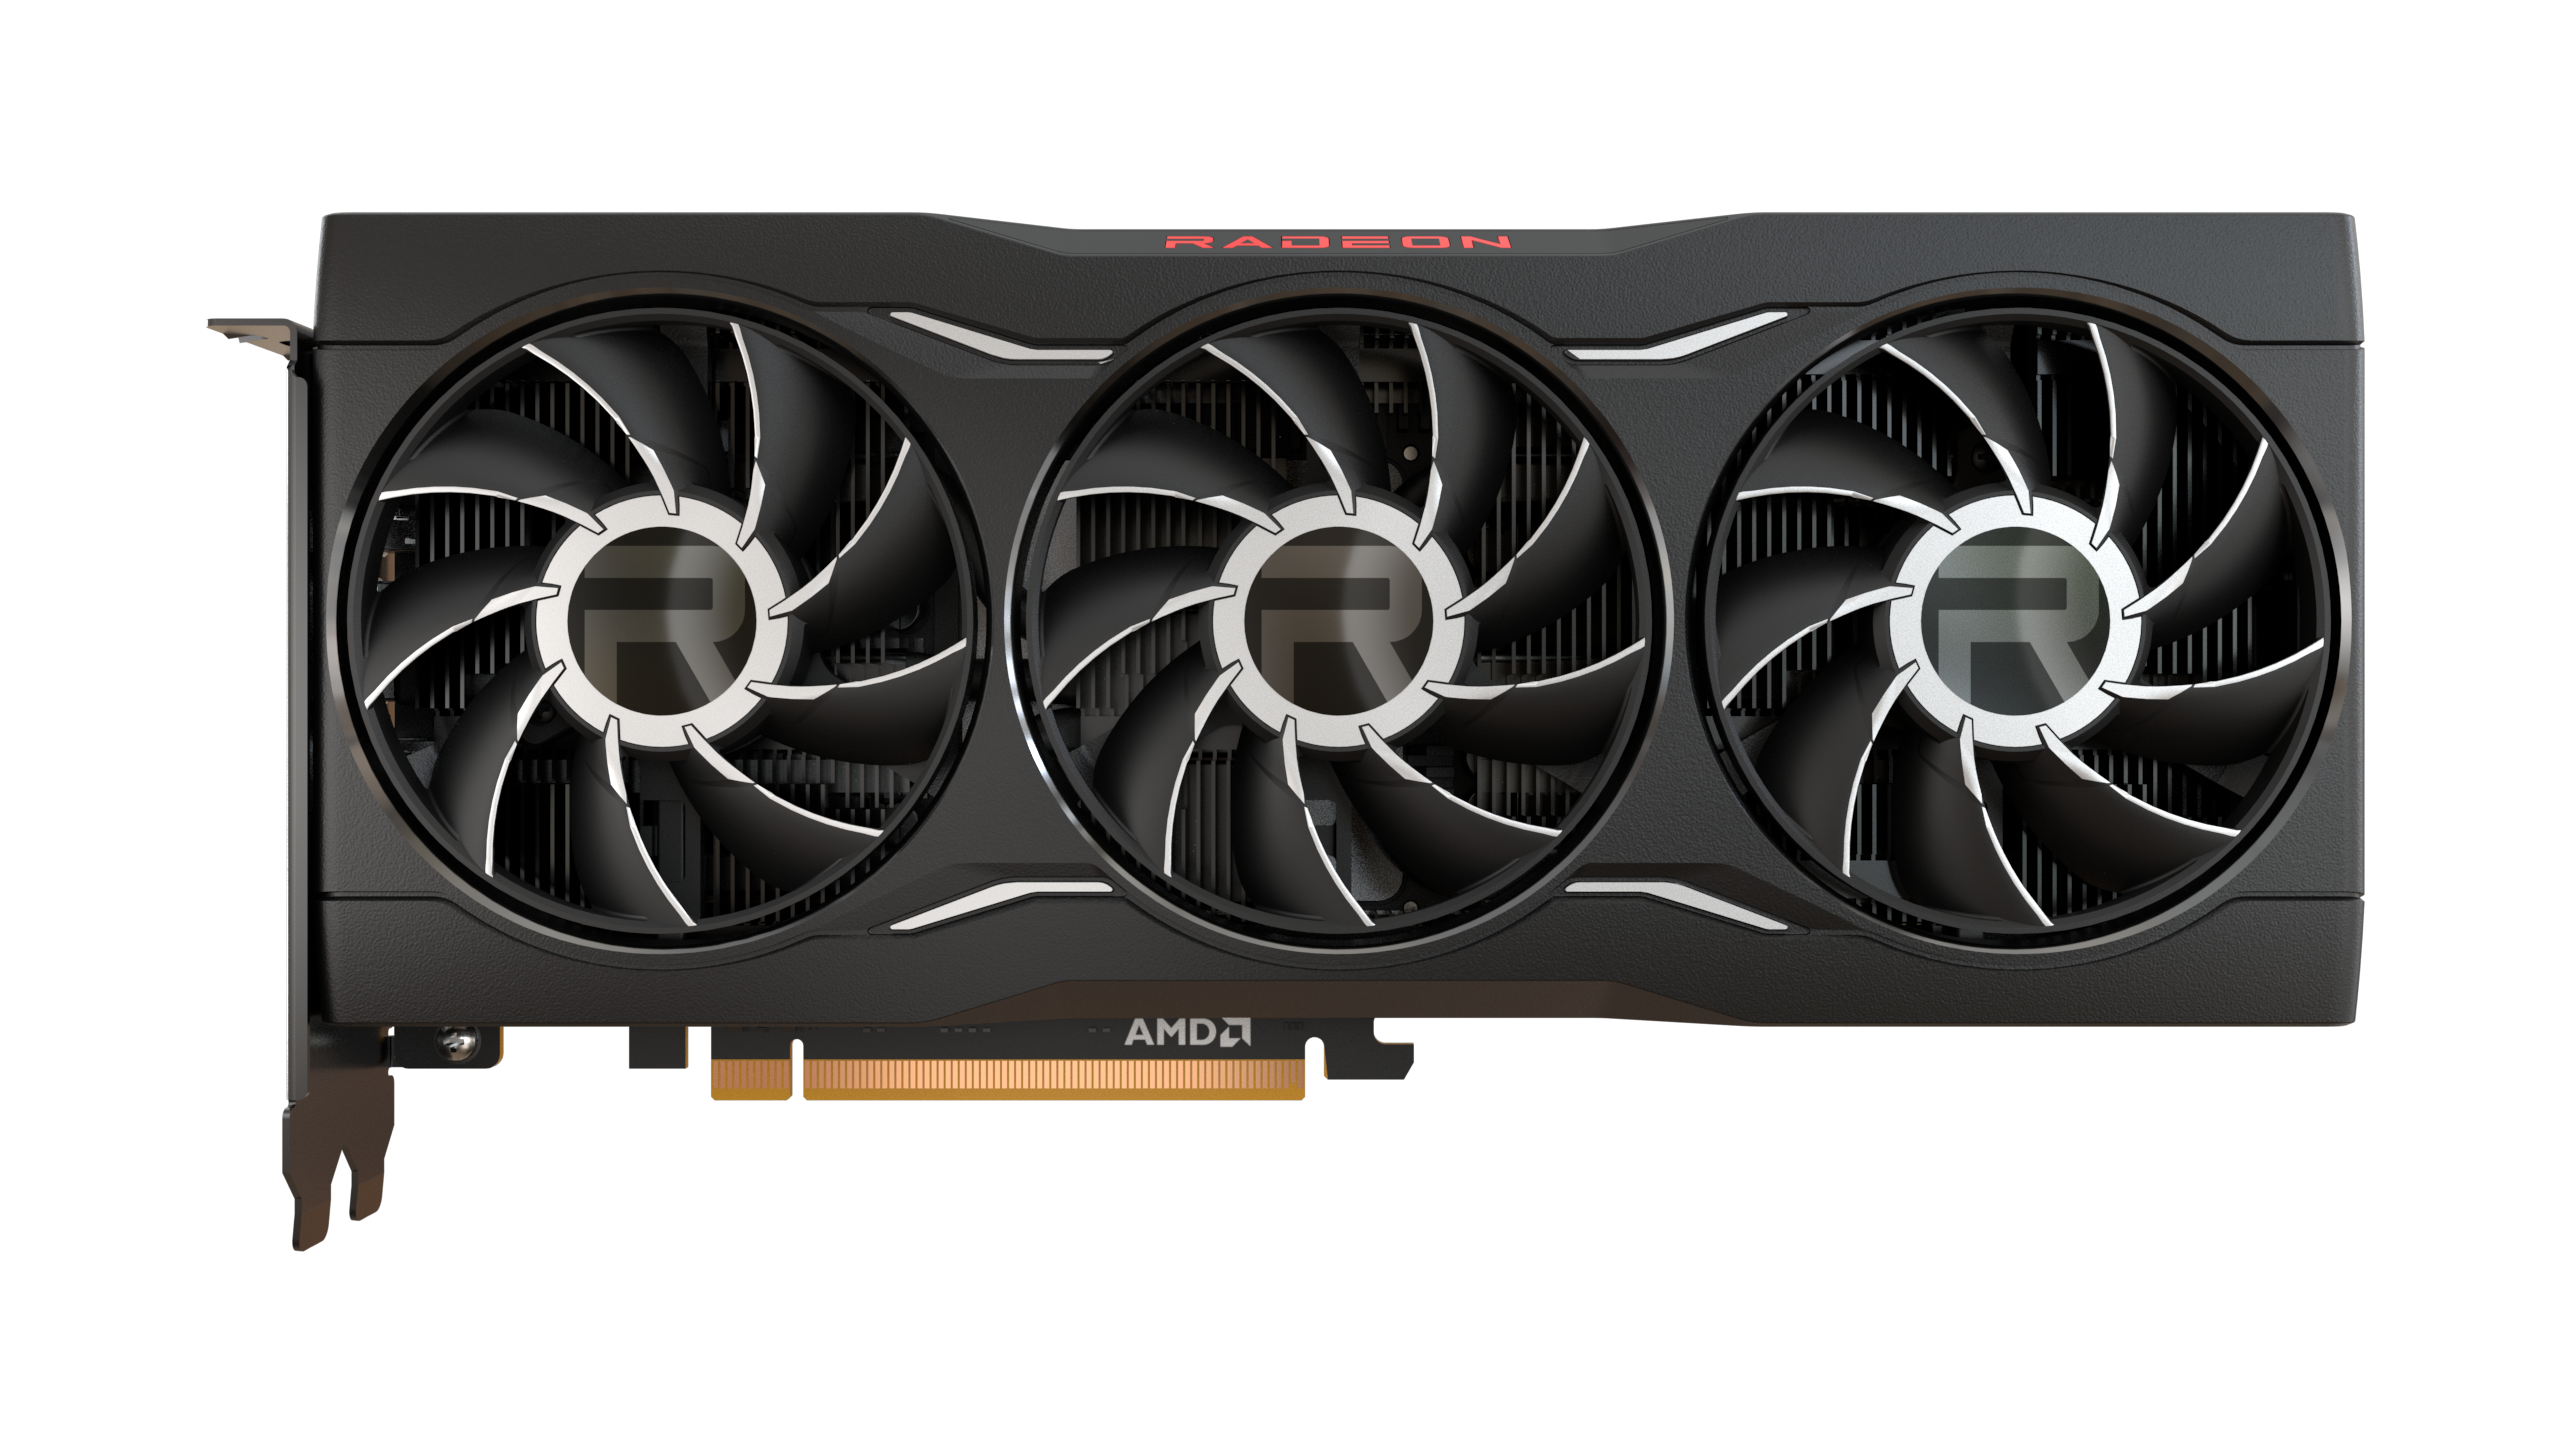 Grab the AMD Radeon RX 6750 XT for its lowest ever price on